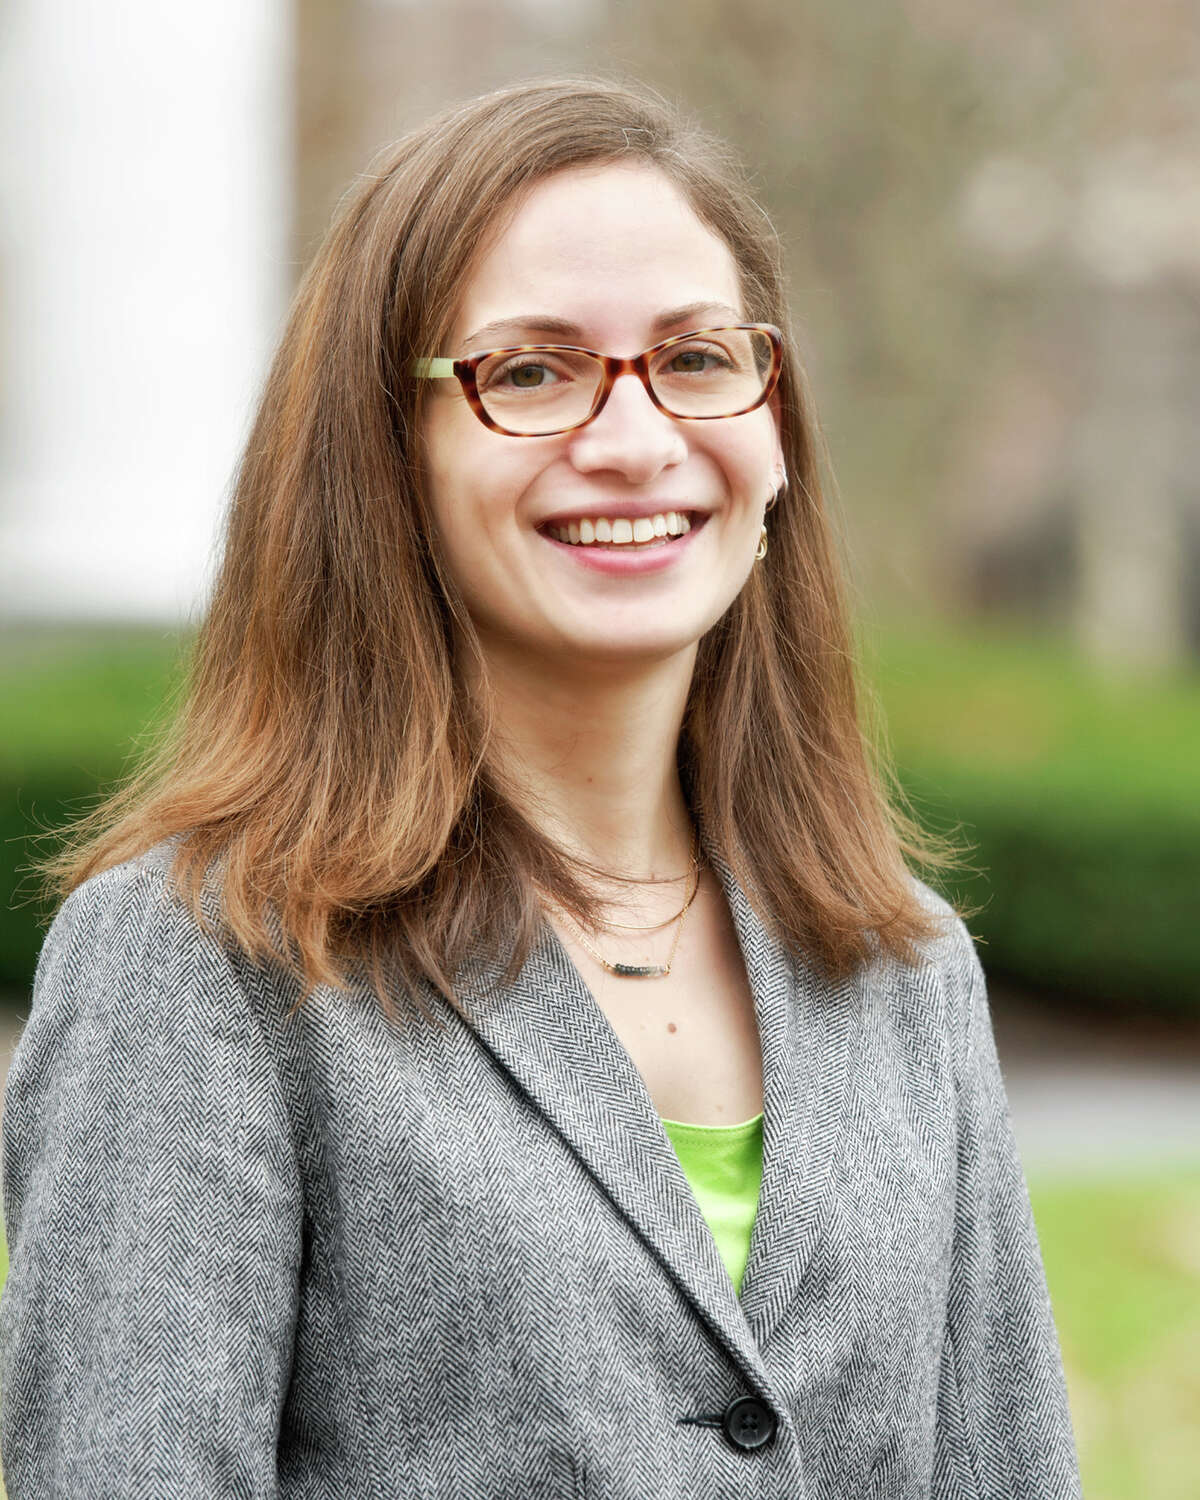 Woodbridge native and Hamilton College math professor Courtney Gibbons was recently selected as a Science and Technology Policy Fellow serving the U.S. Congress.